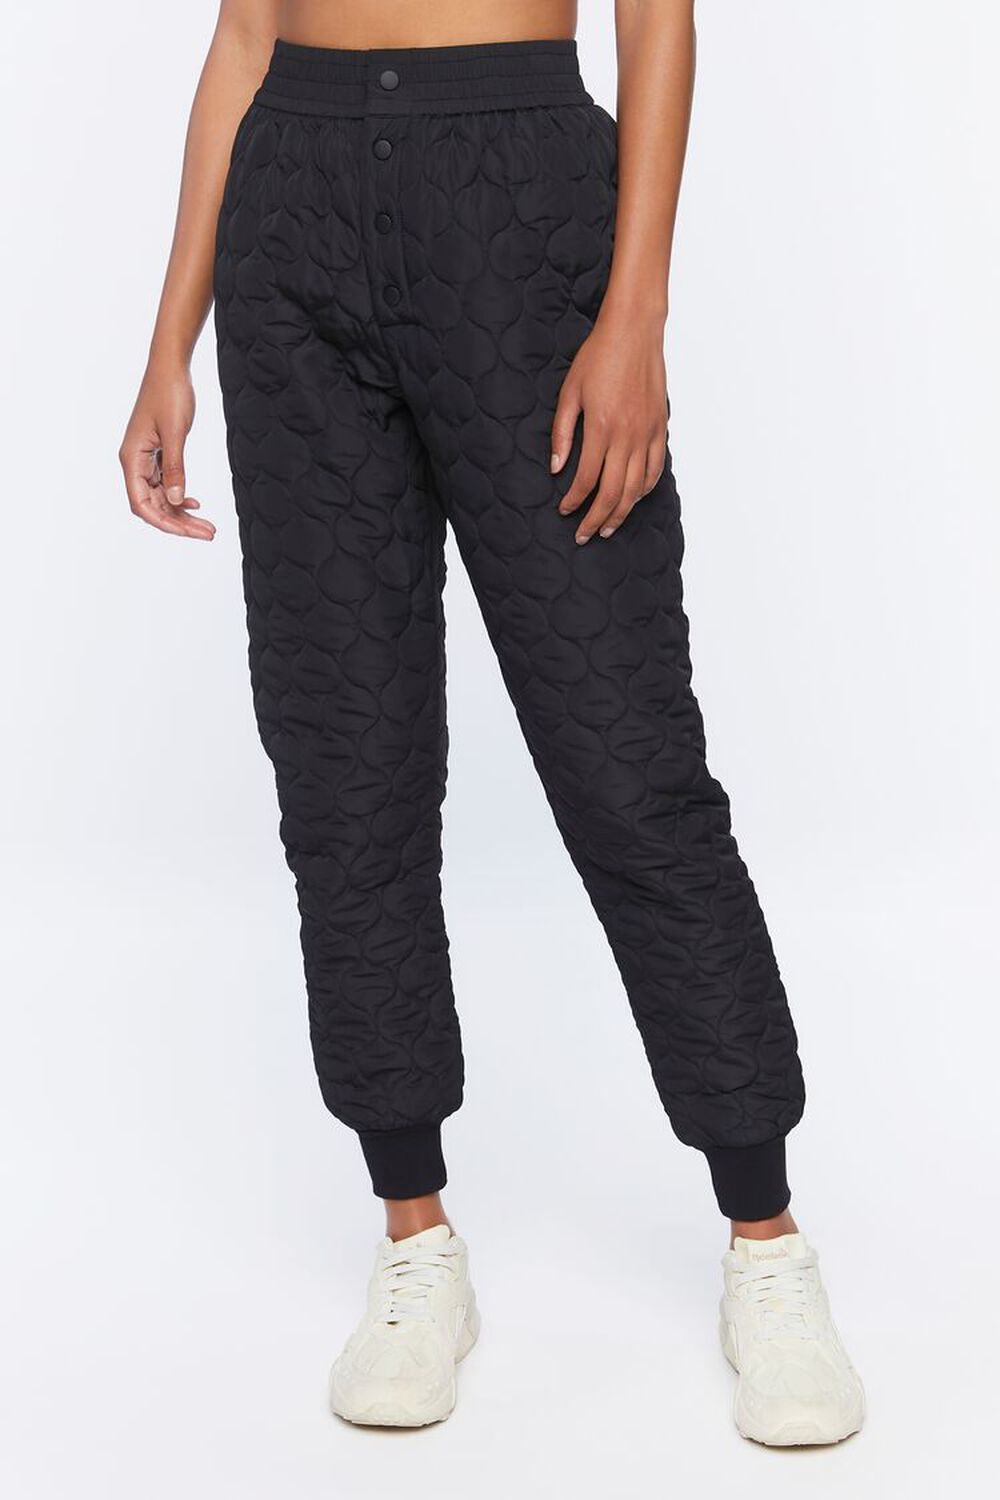 BLACK Active Quilted Joggers, image 2